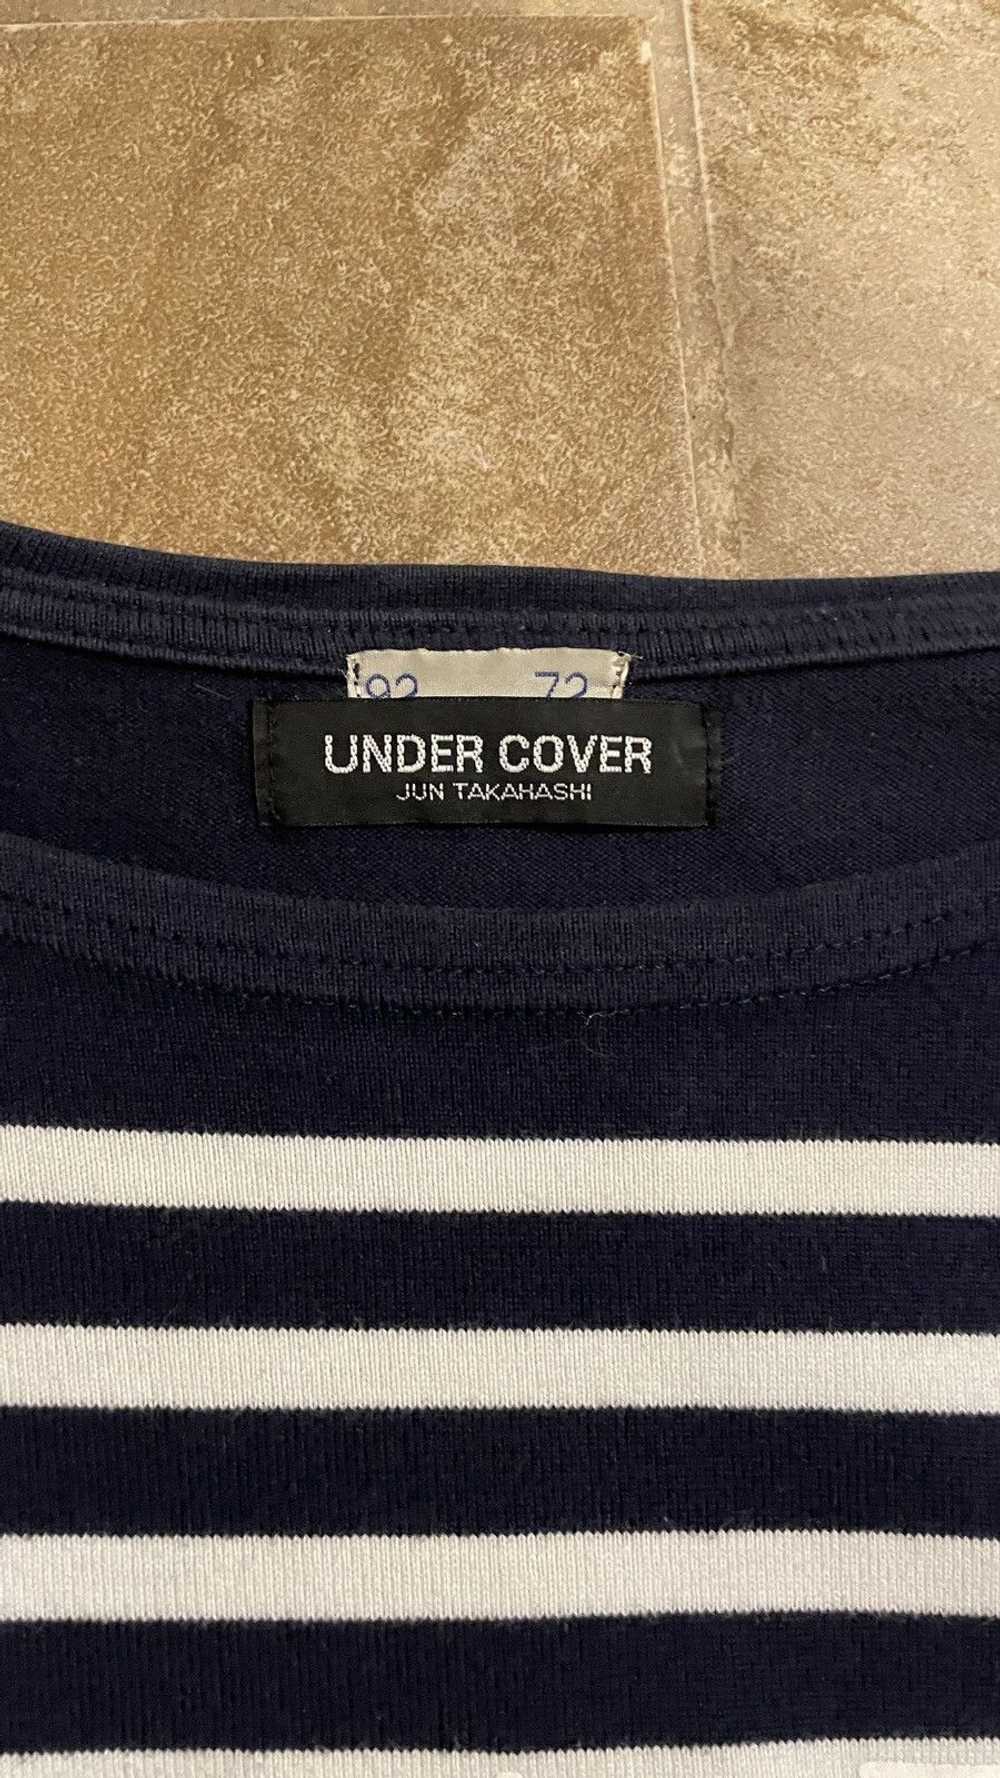 Undercover Undercover MAD longsleeve - image 2